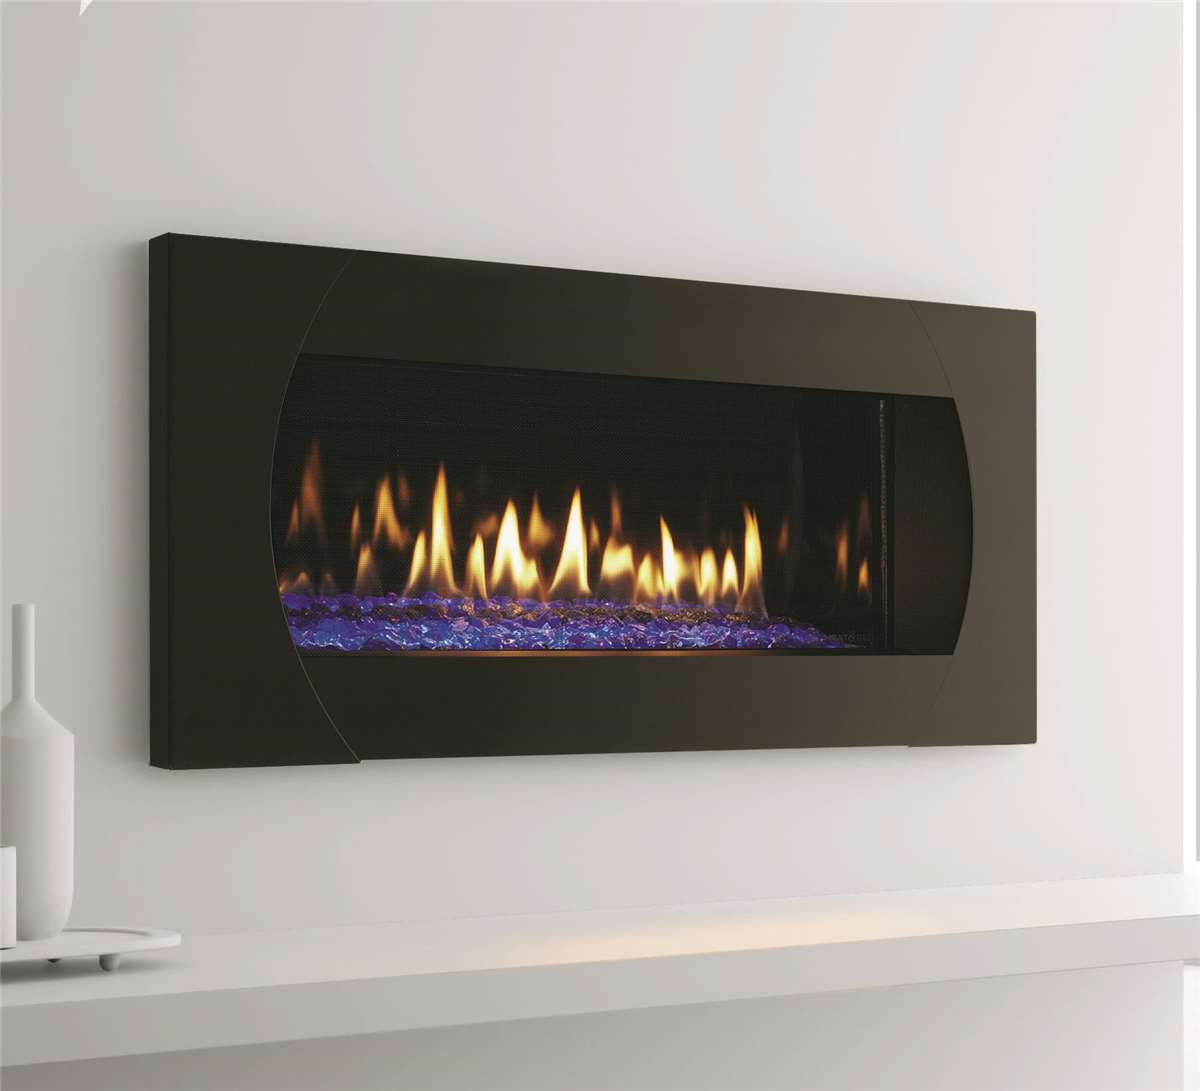 Heat-n-Glo Mezzo 36 direct vent gas fireplace with Quattro front and blue glass media.